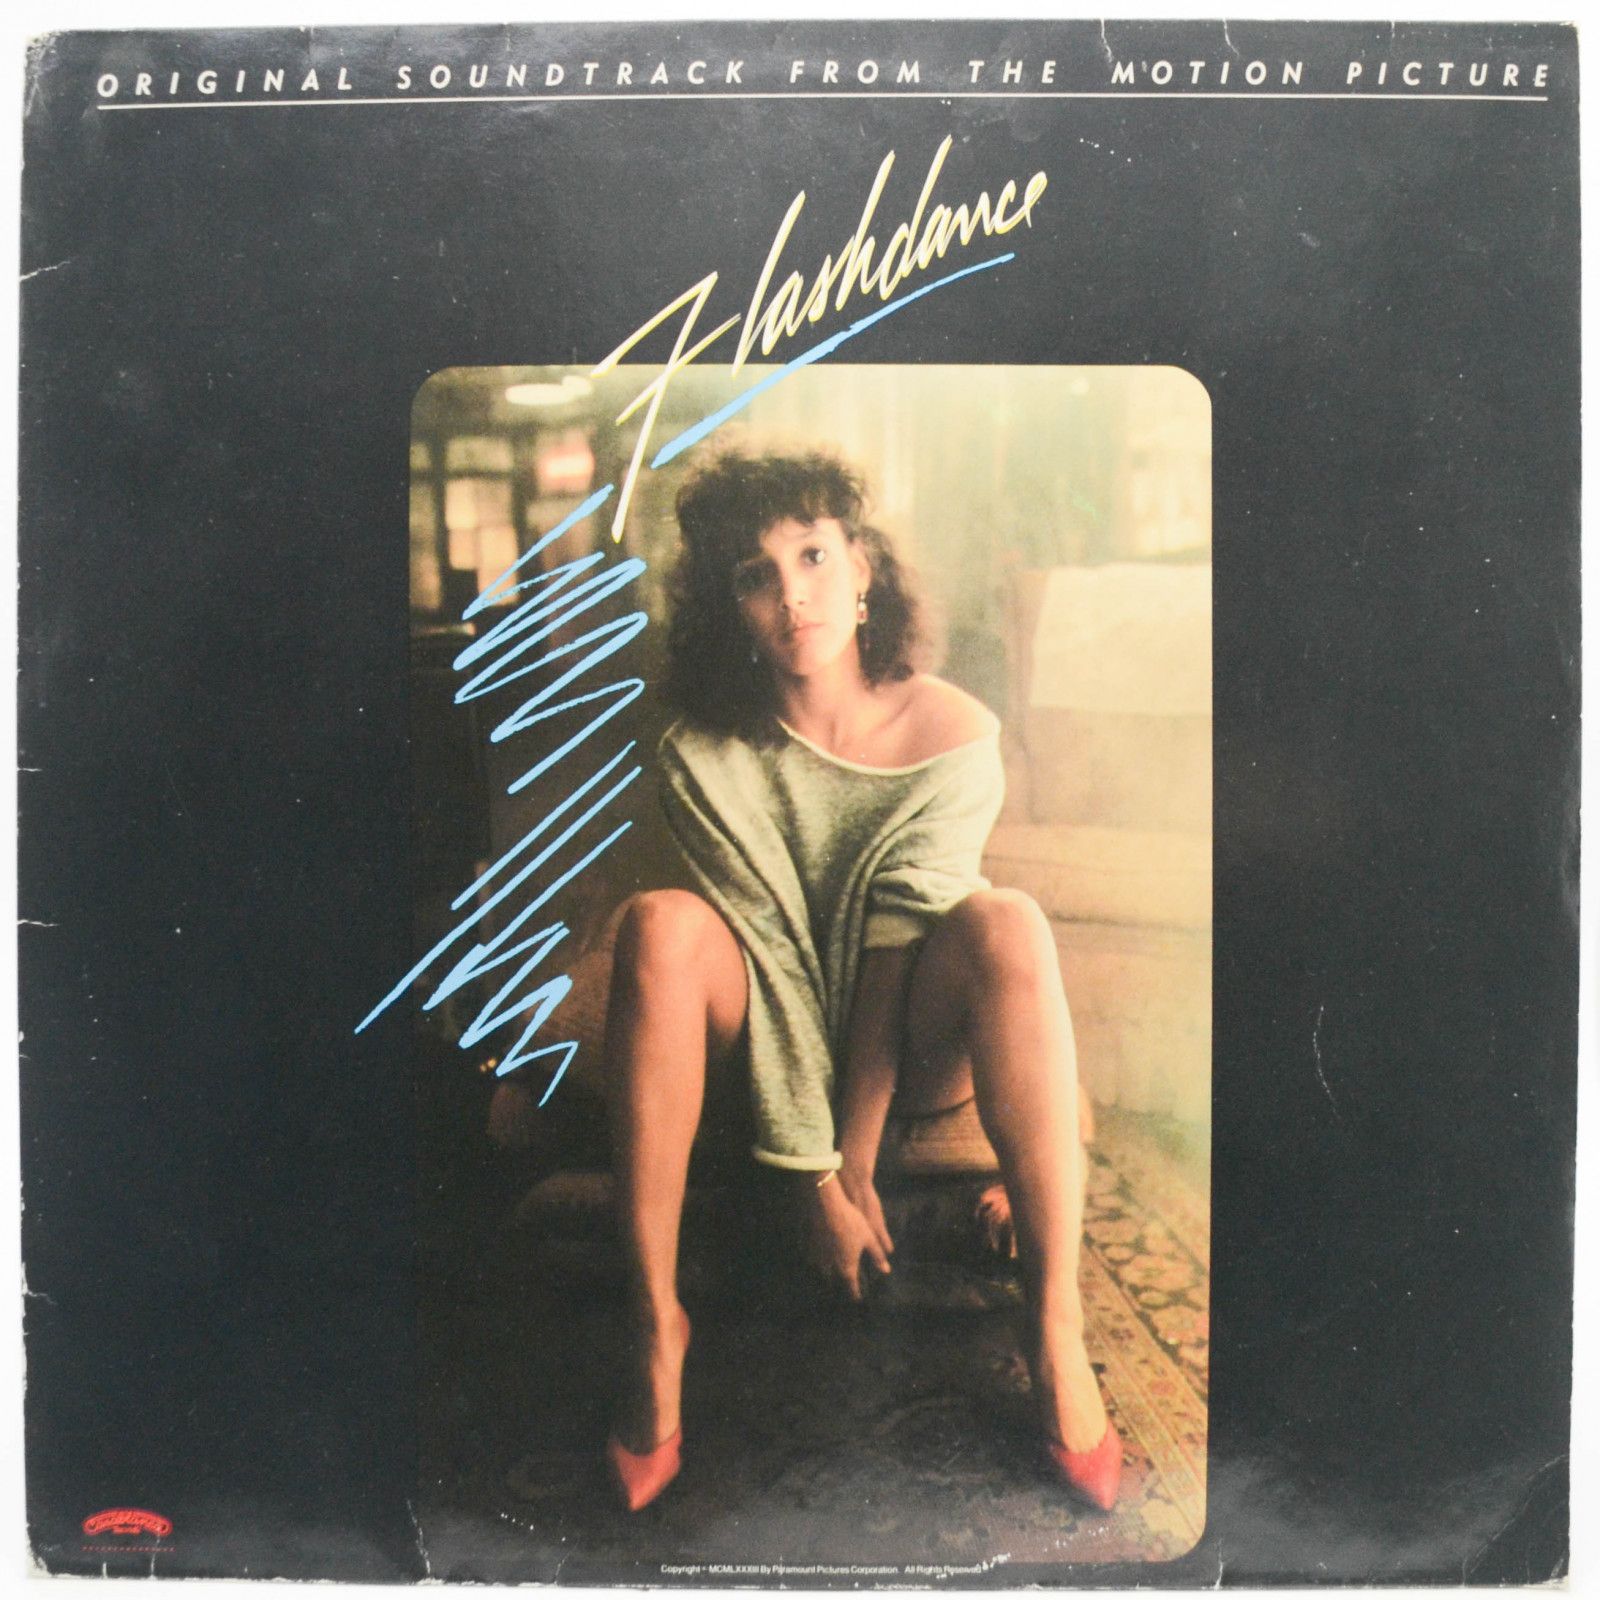 Various — Flashdance (Original Soundtrack From The Motion Picture), 1983